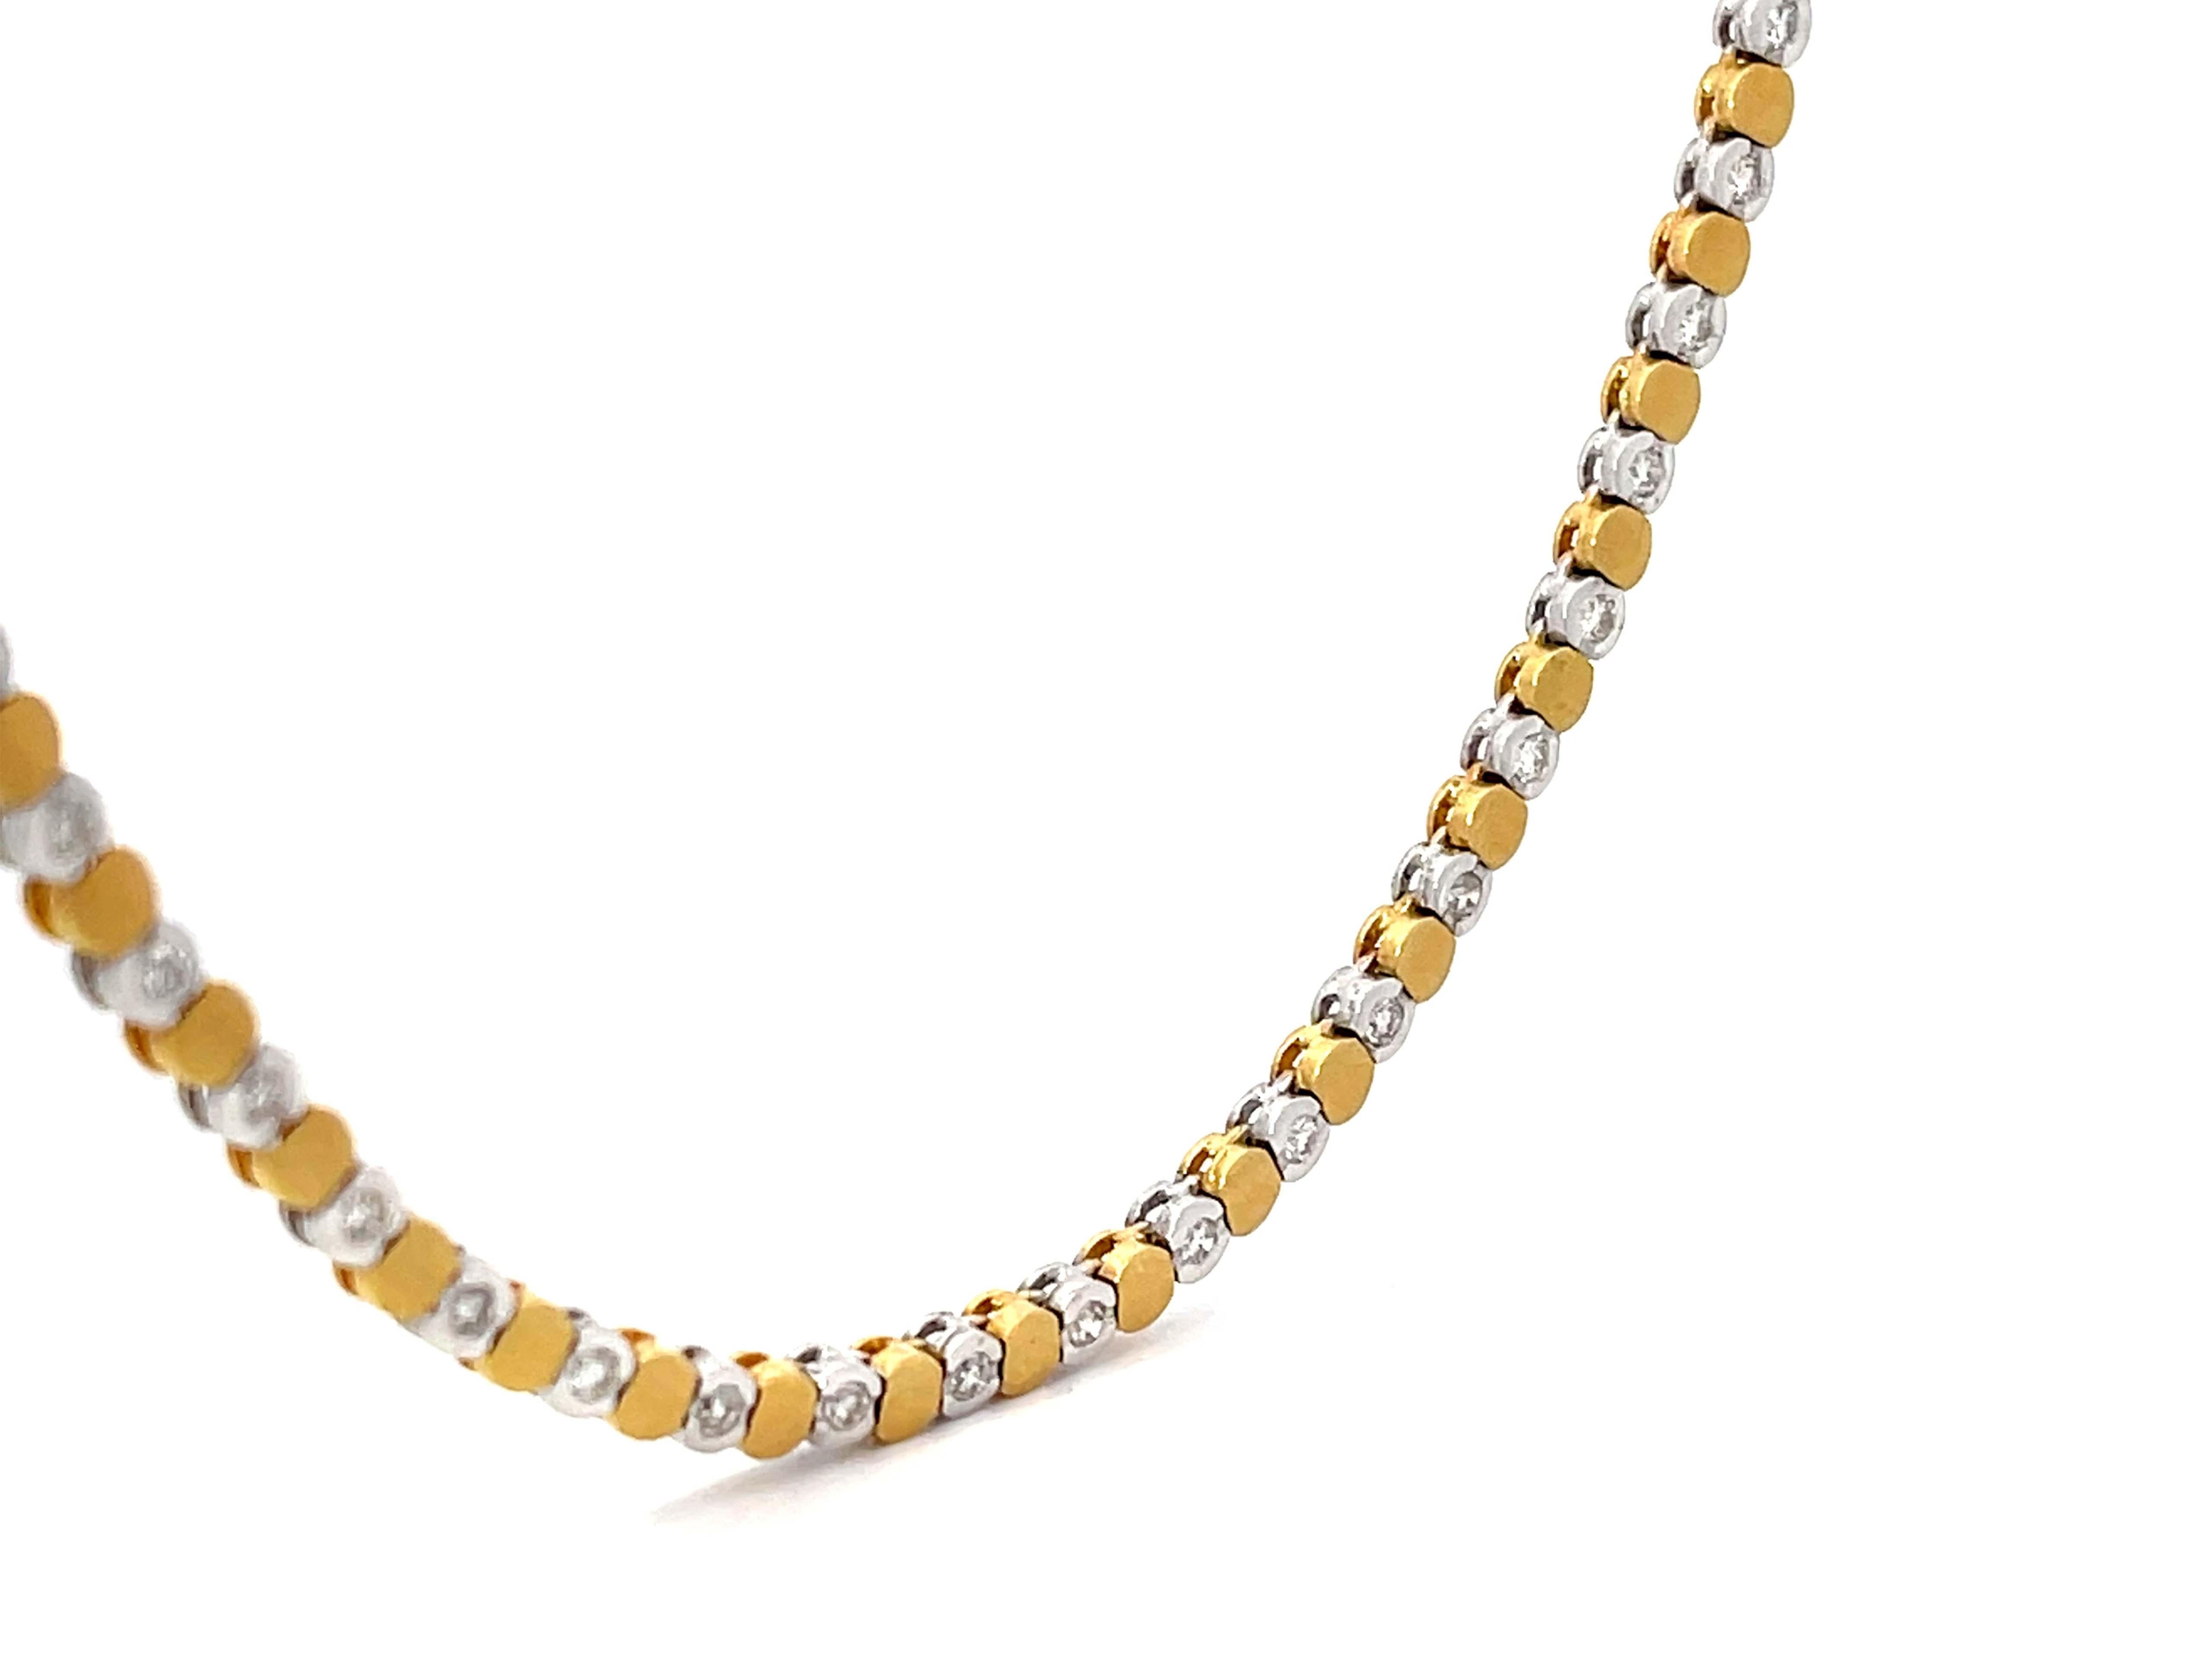 Modern Solid 18K Gold Diamond Chain For Sale